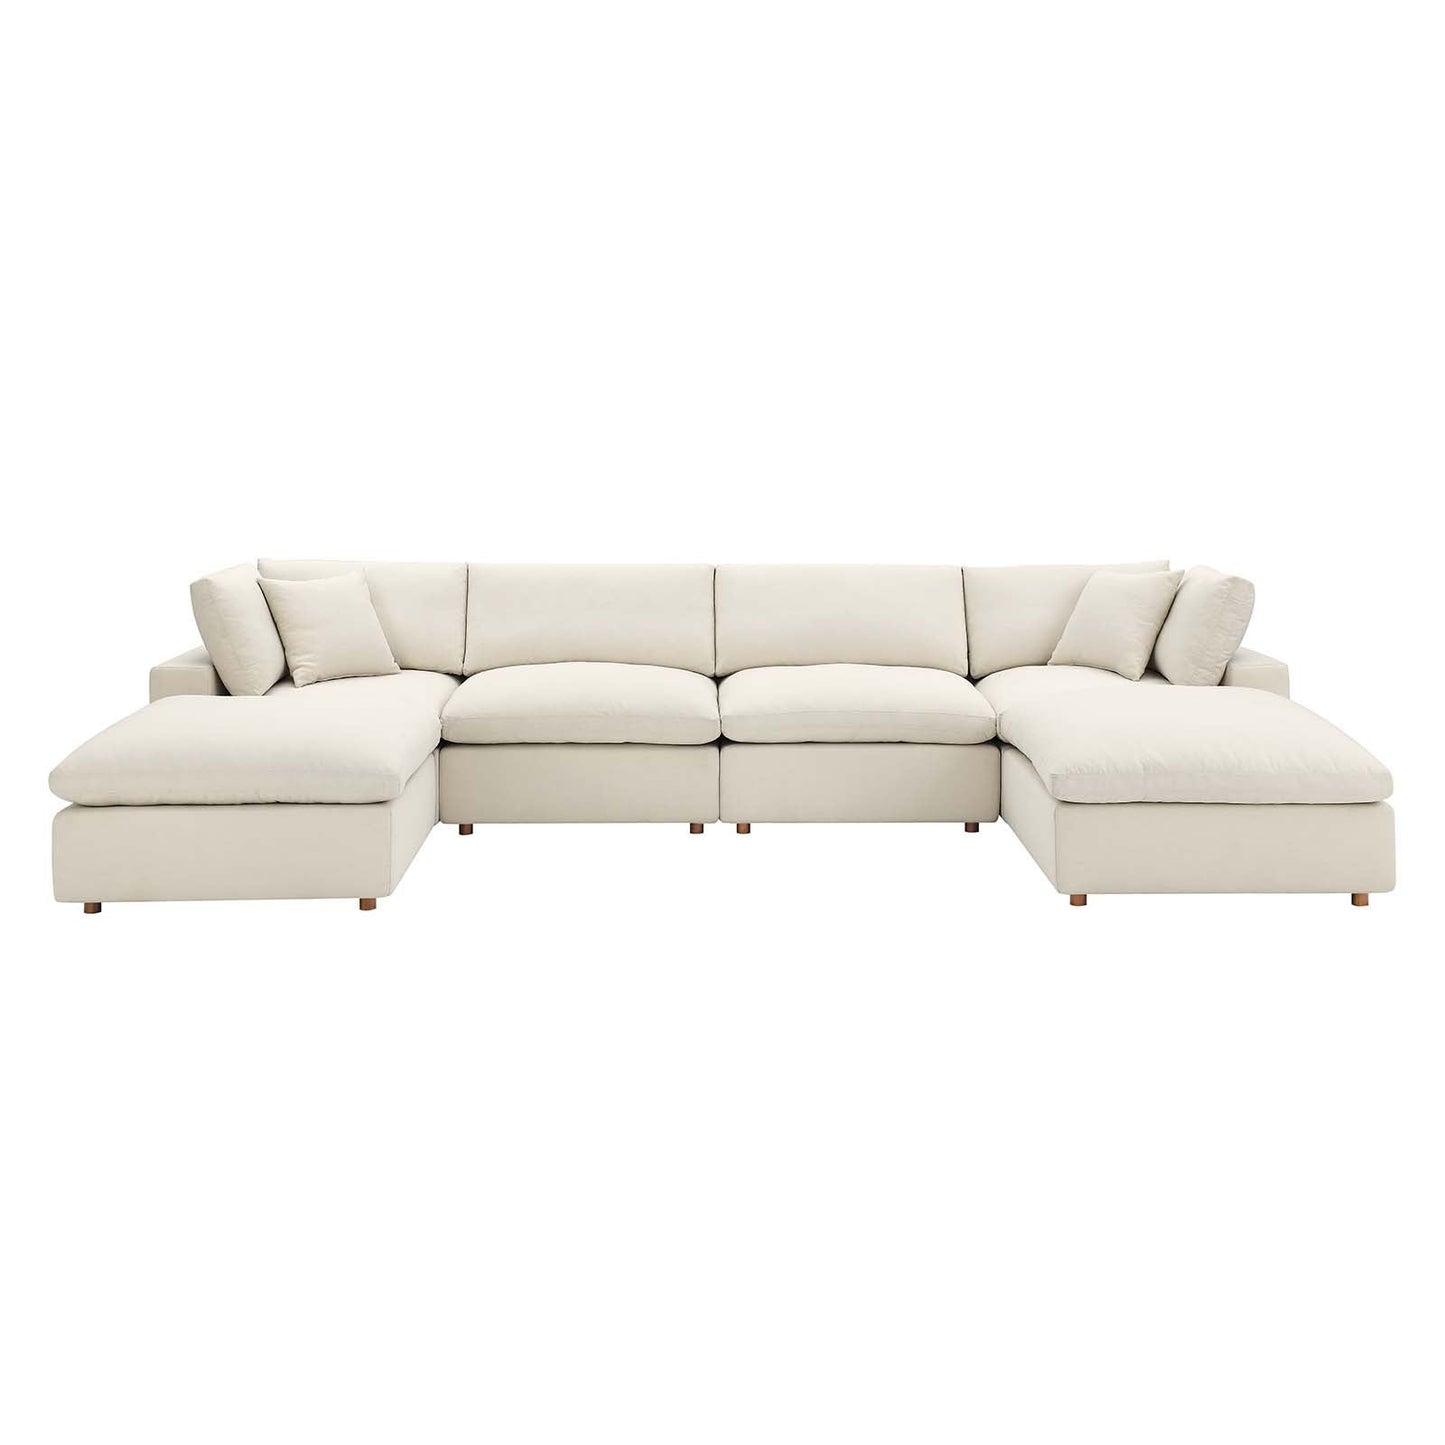 Connie Down Filled Overstuffed 6-Piece Sectional Sofa